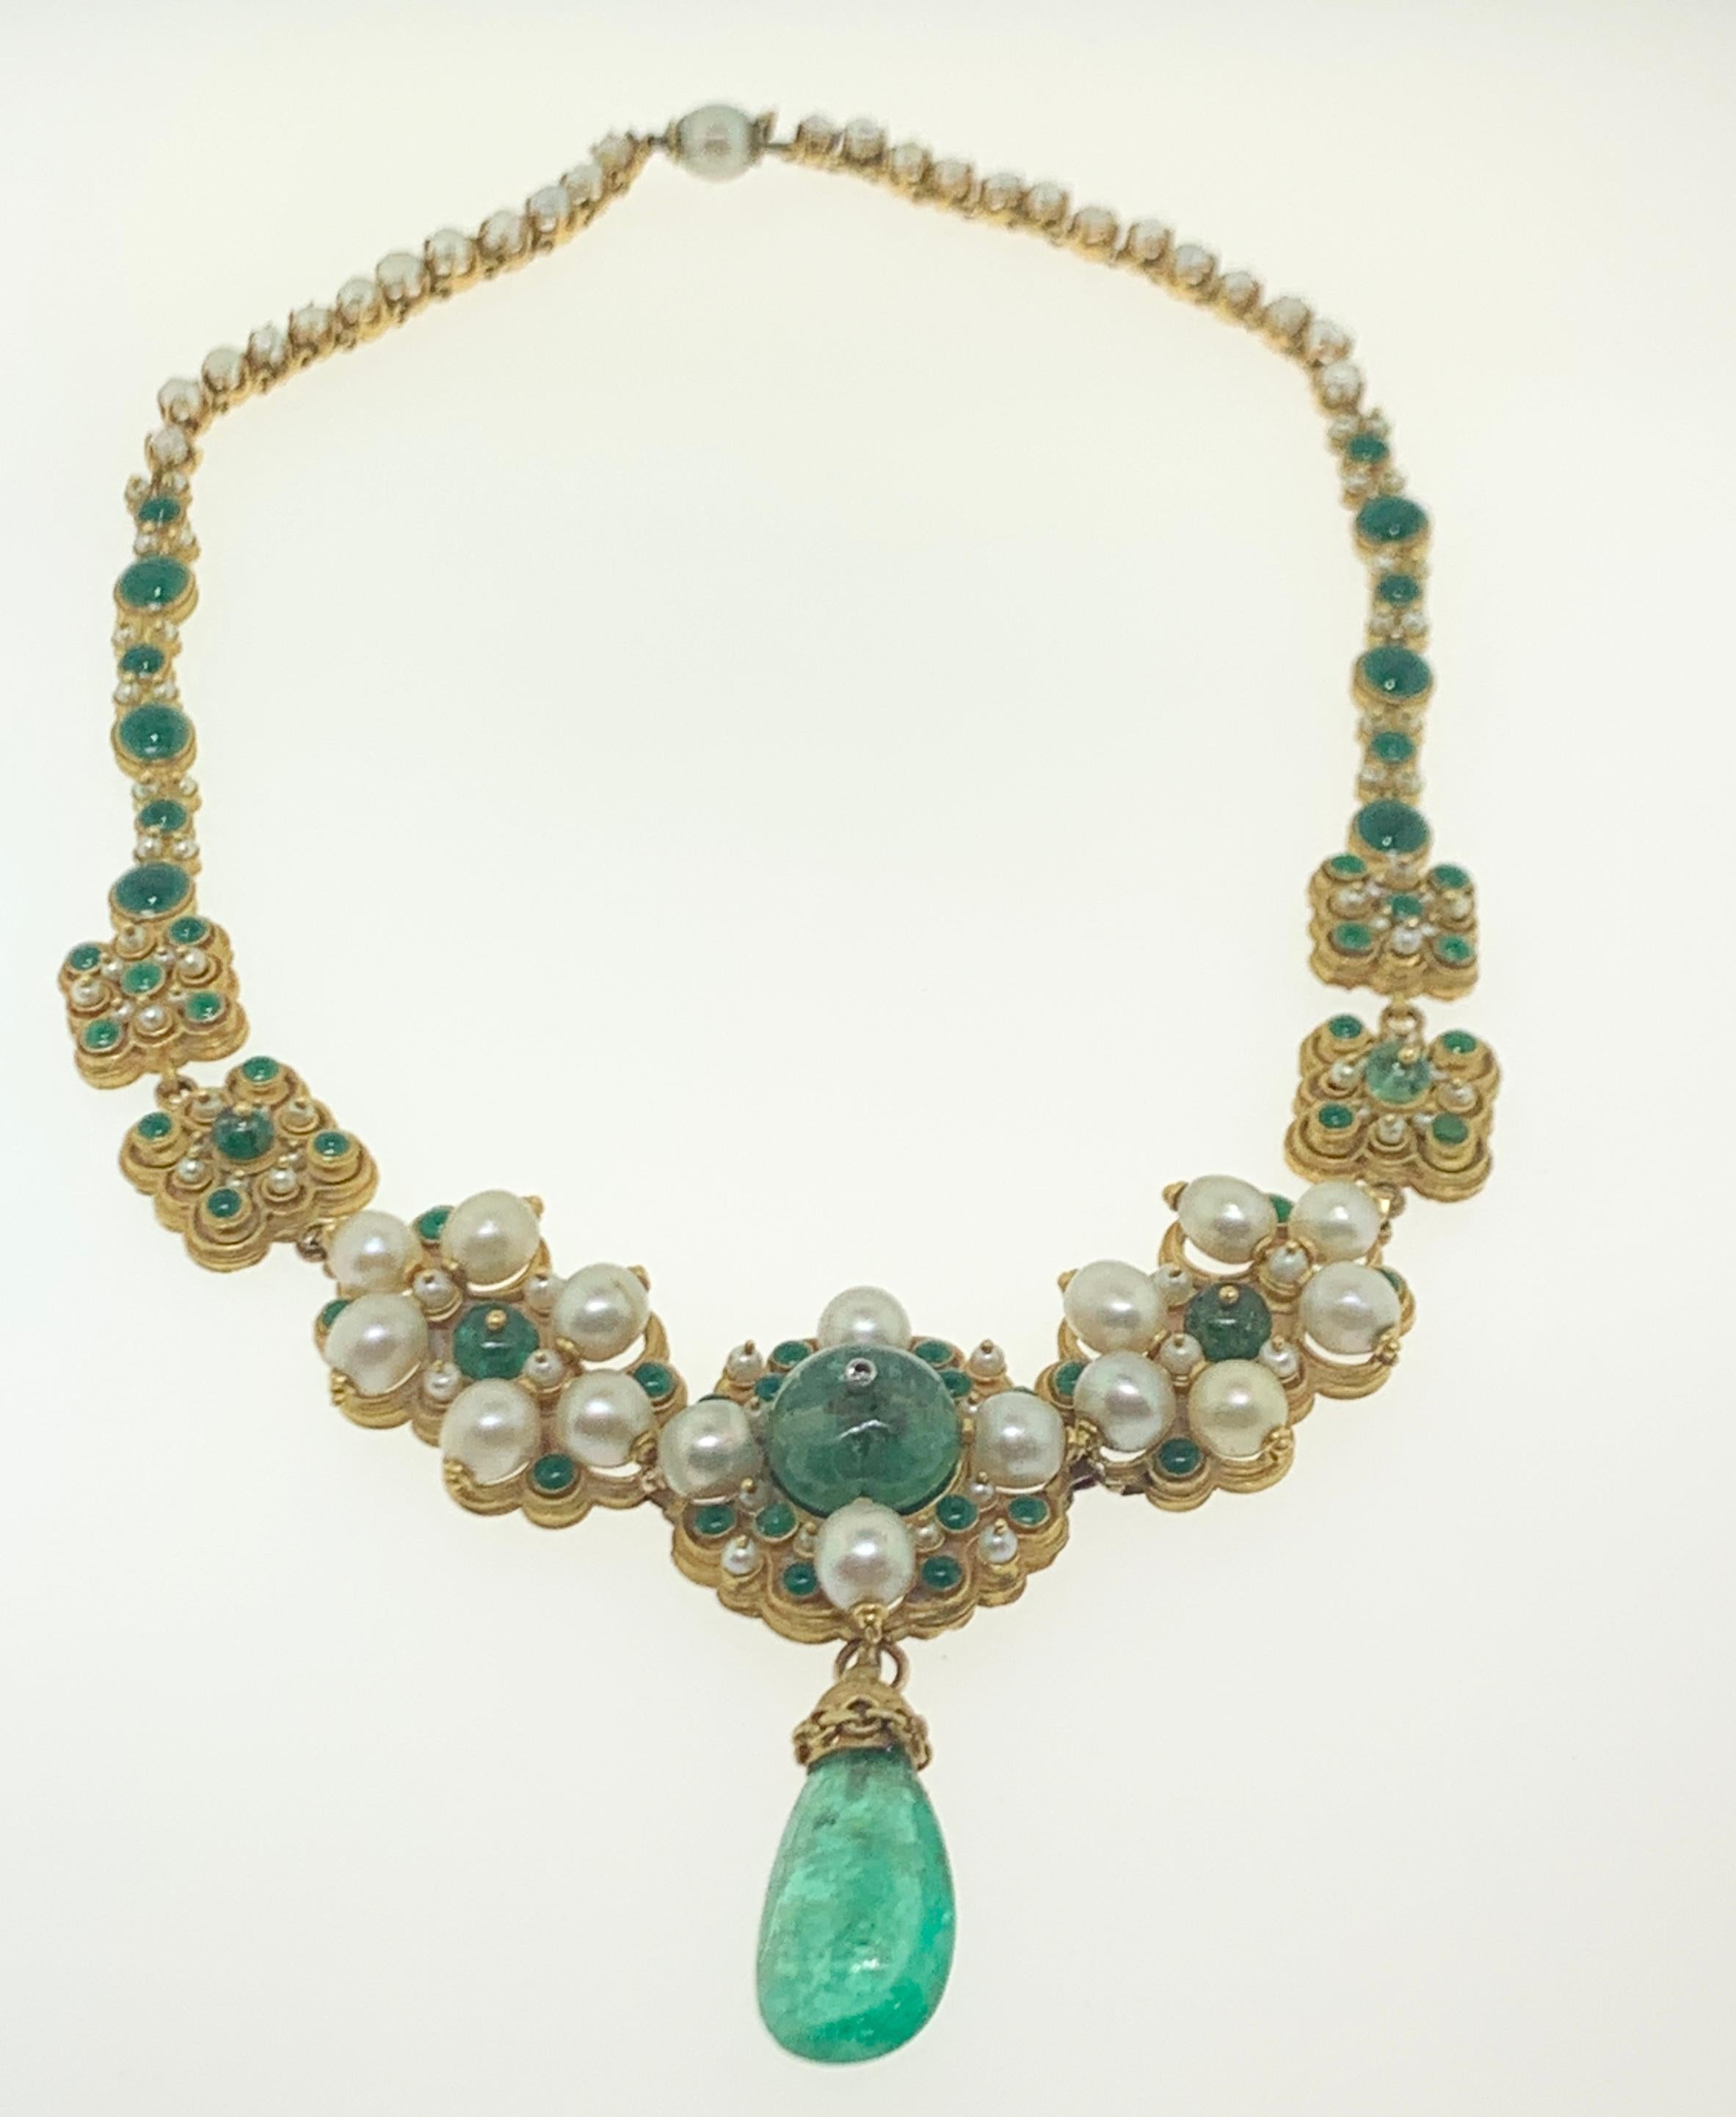 Women's Antique Emerald Pearl and Enamel Necklace